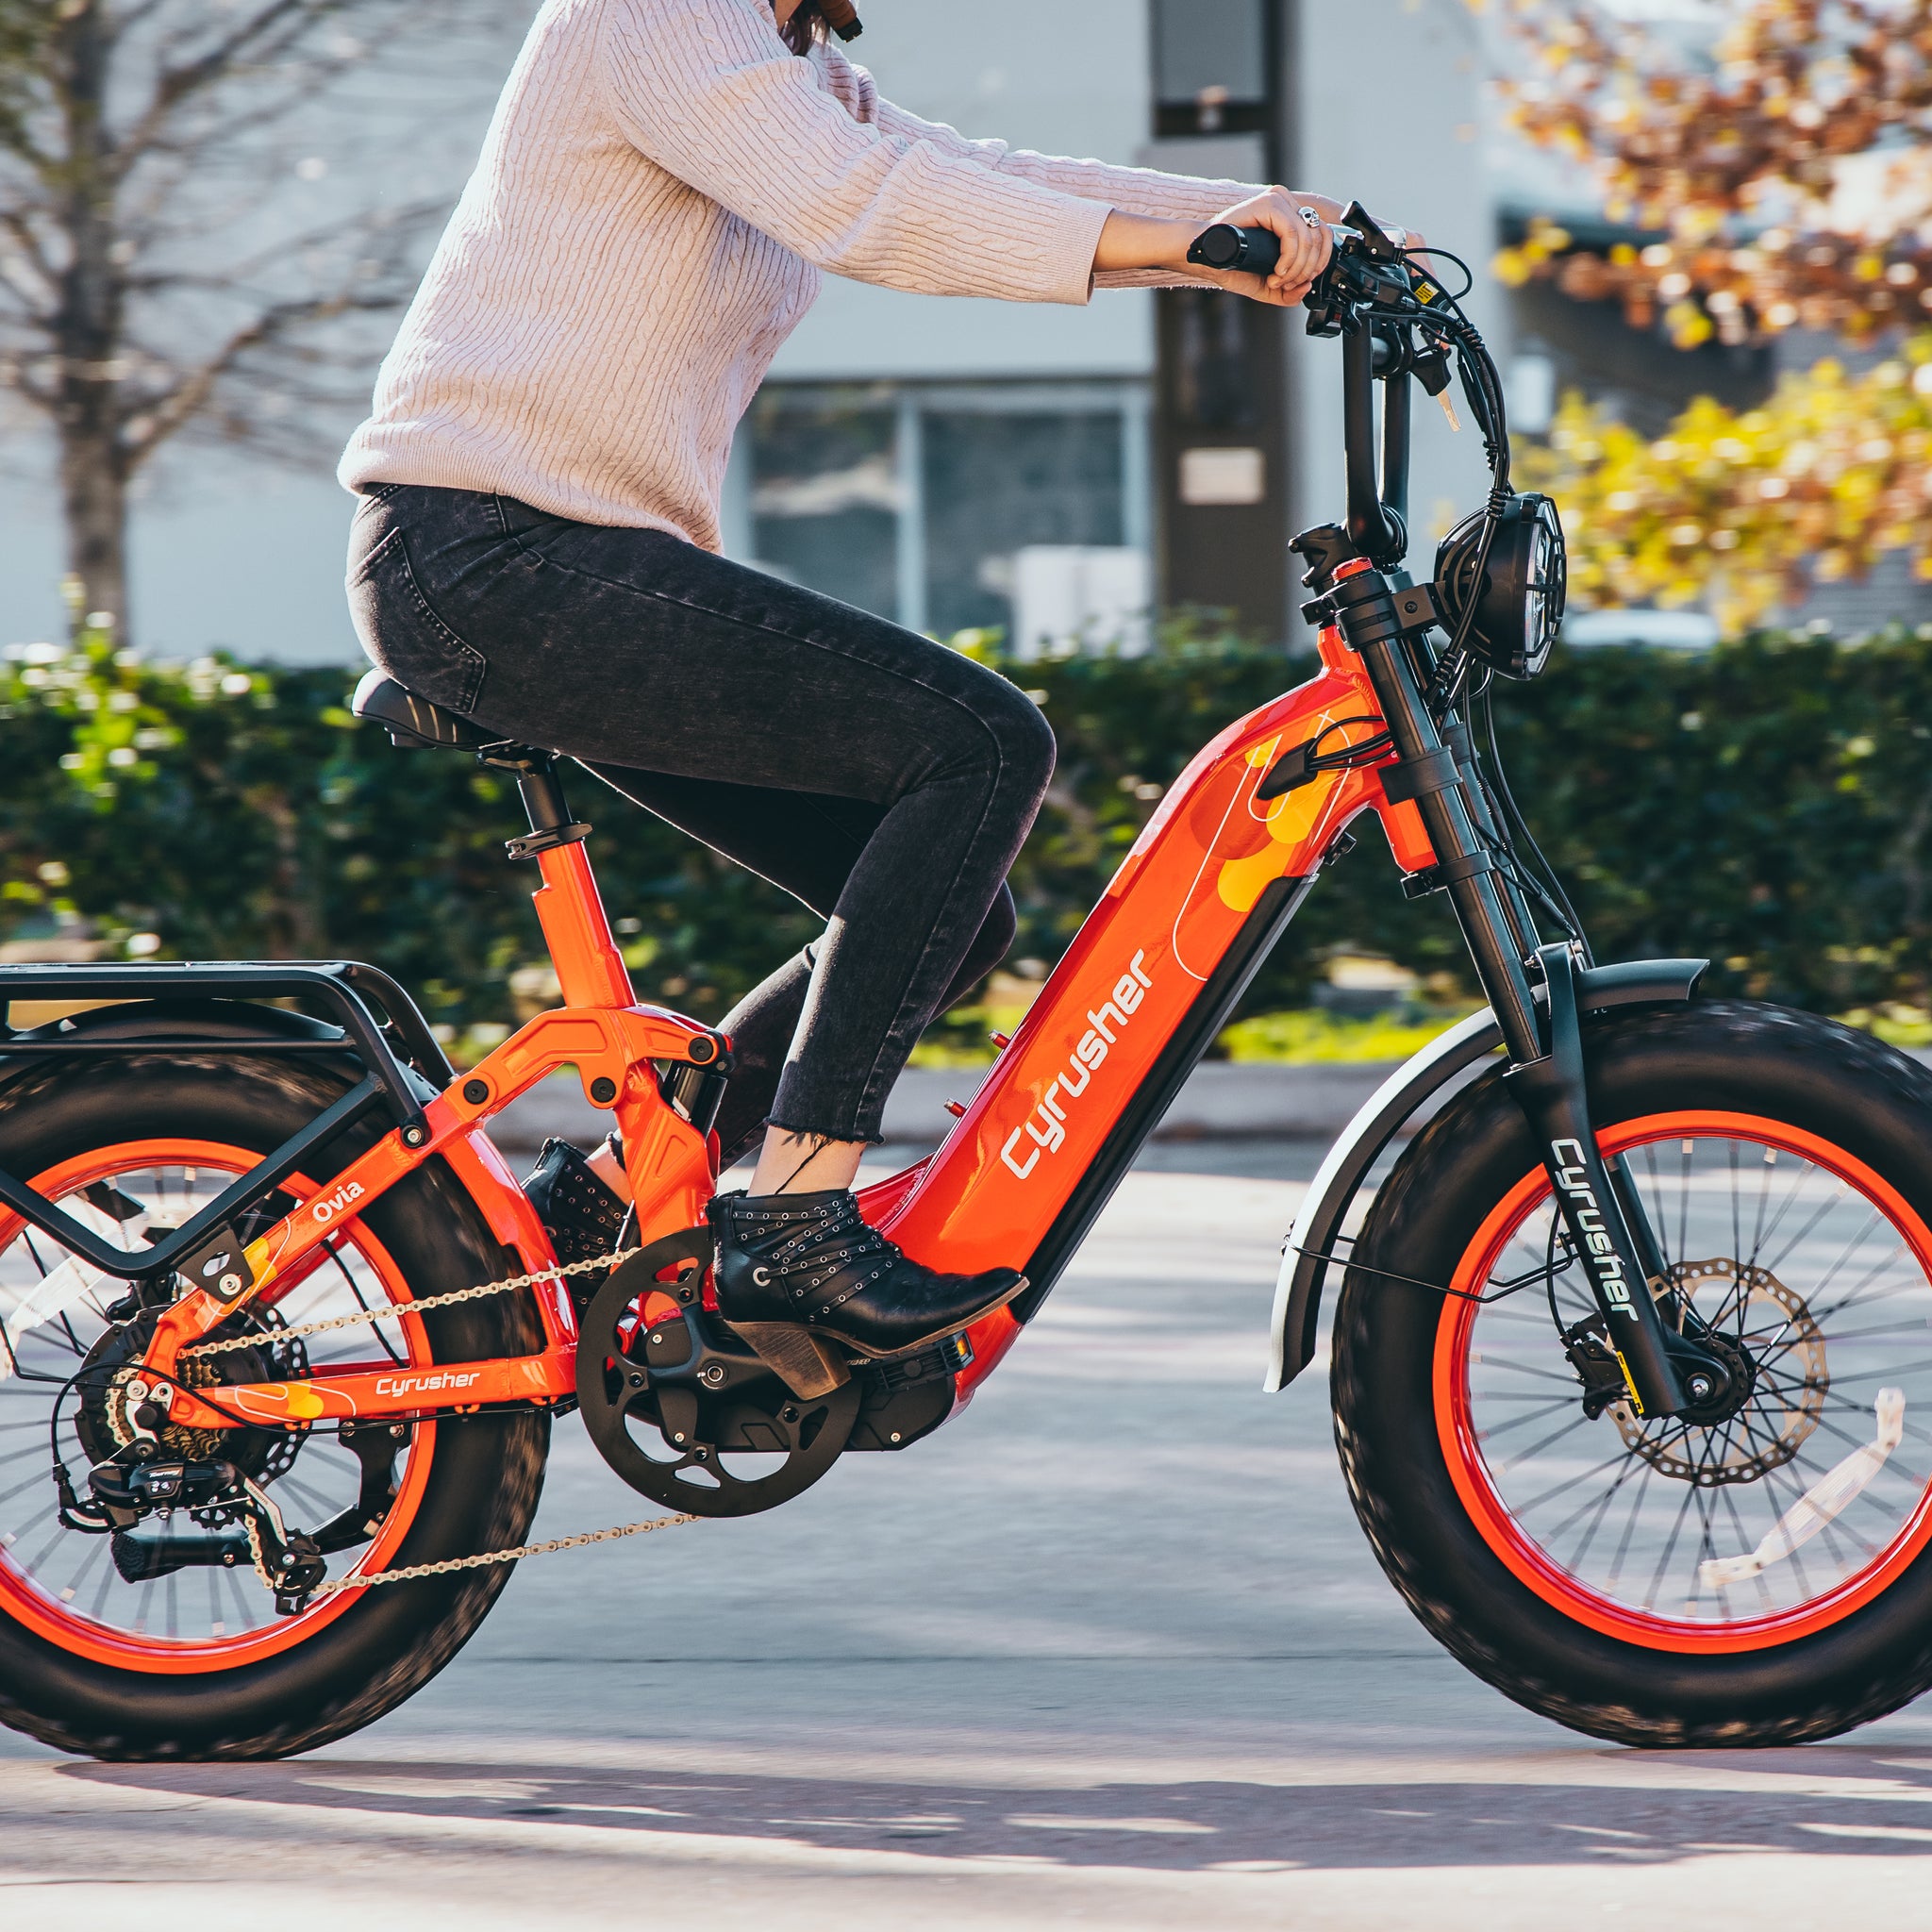 Cyrusher Ovia Electric Bike - Your Path to Independent Travel